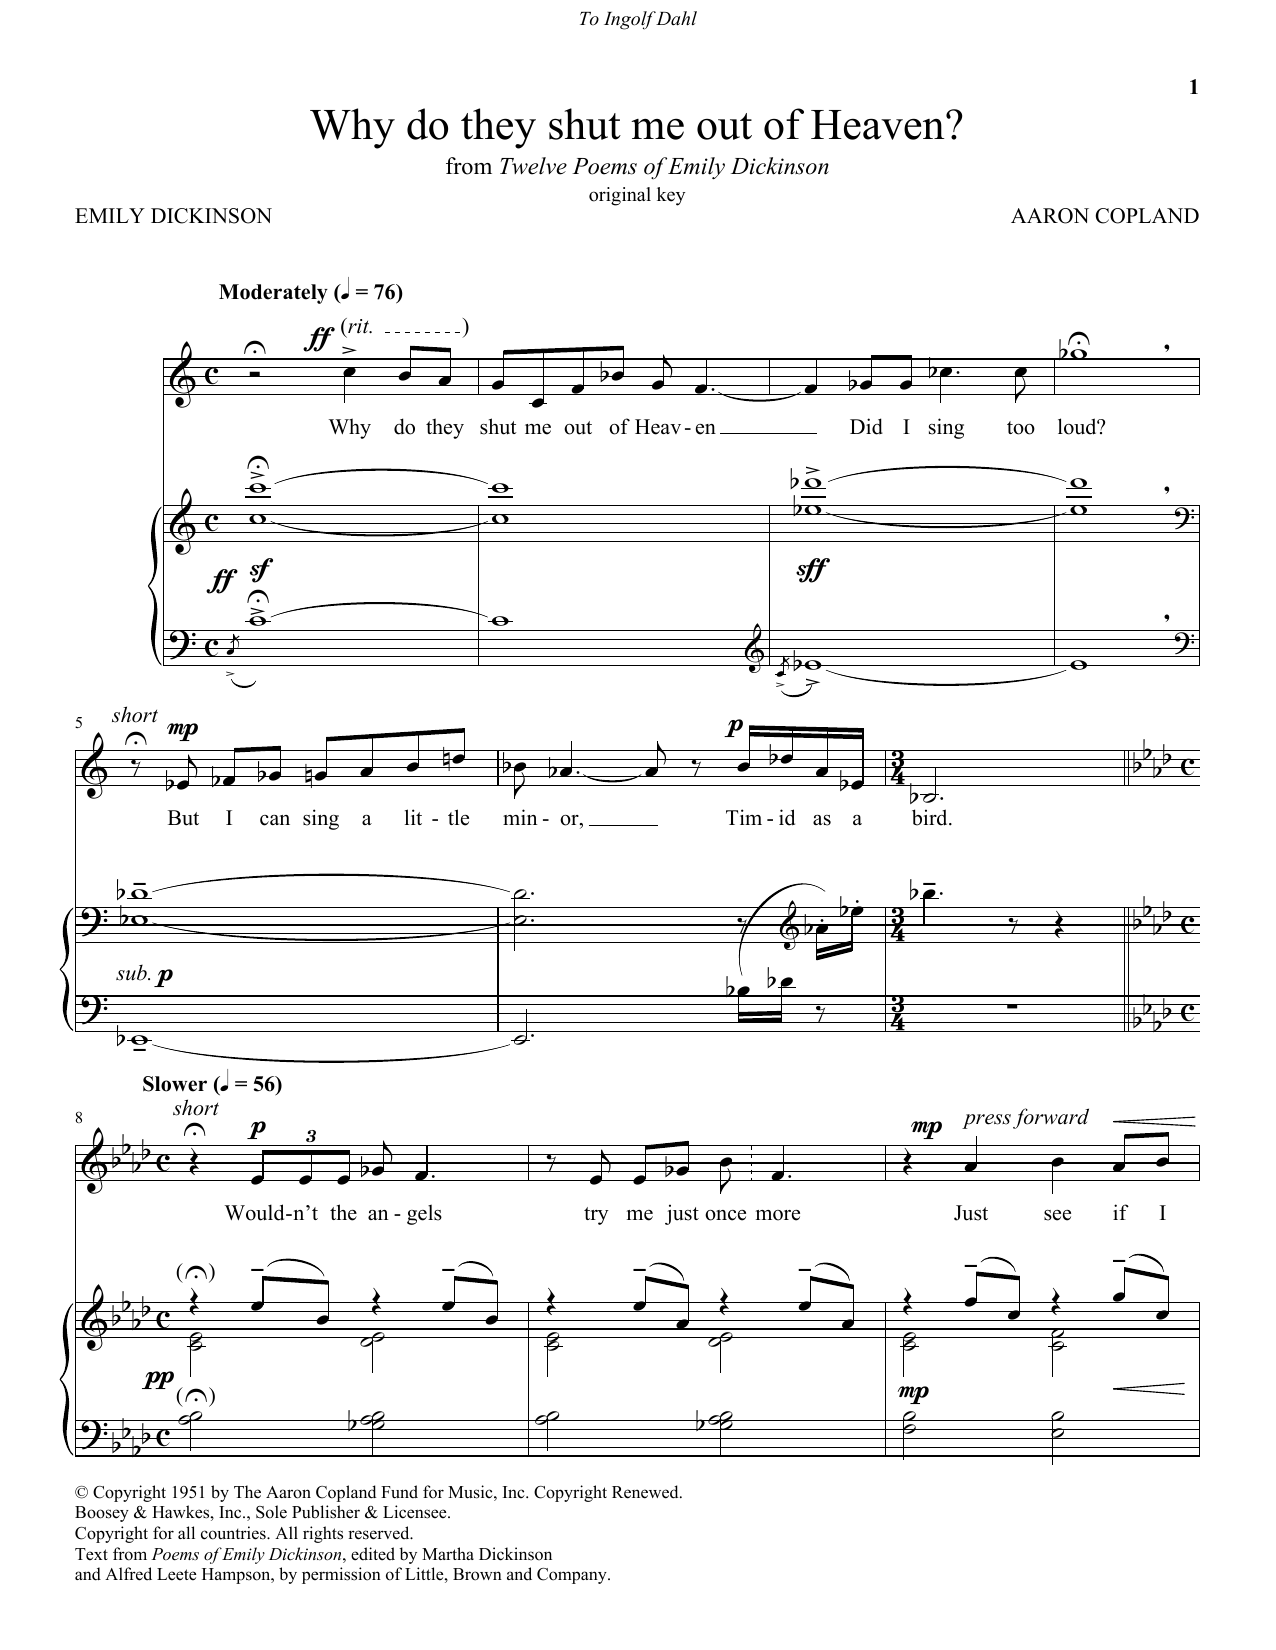 Download Aaron Copland Why Do They Shut Me Out Of Heaven? Sheet Music